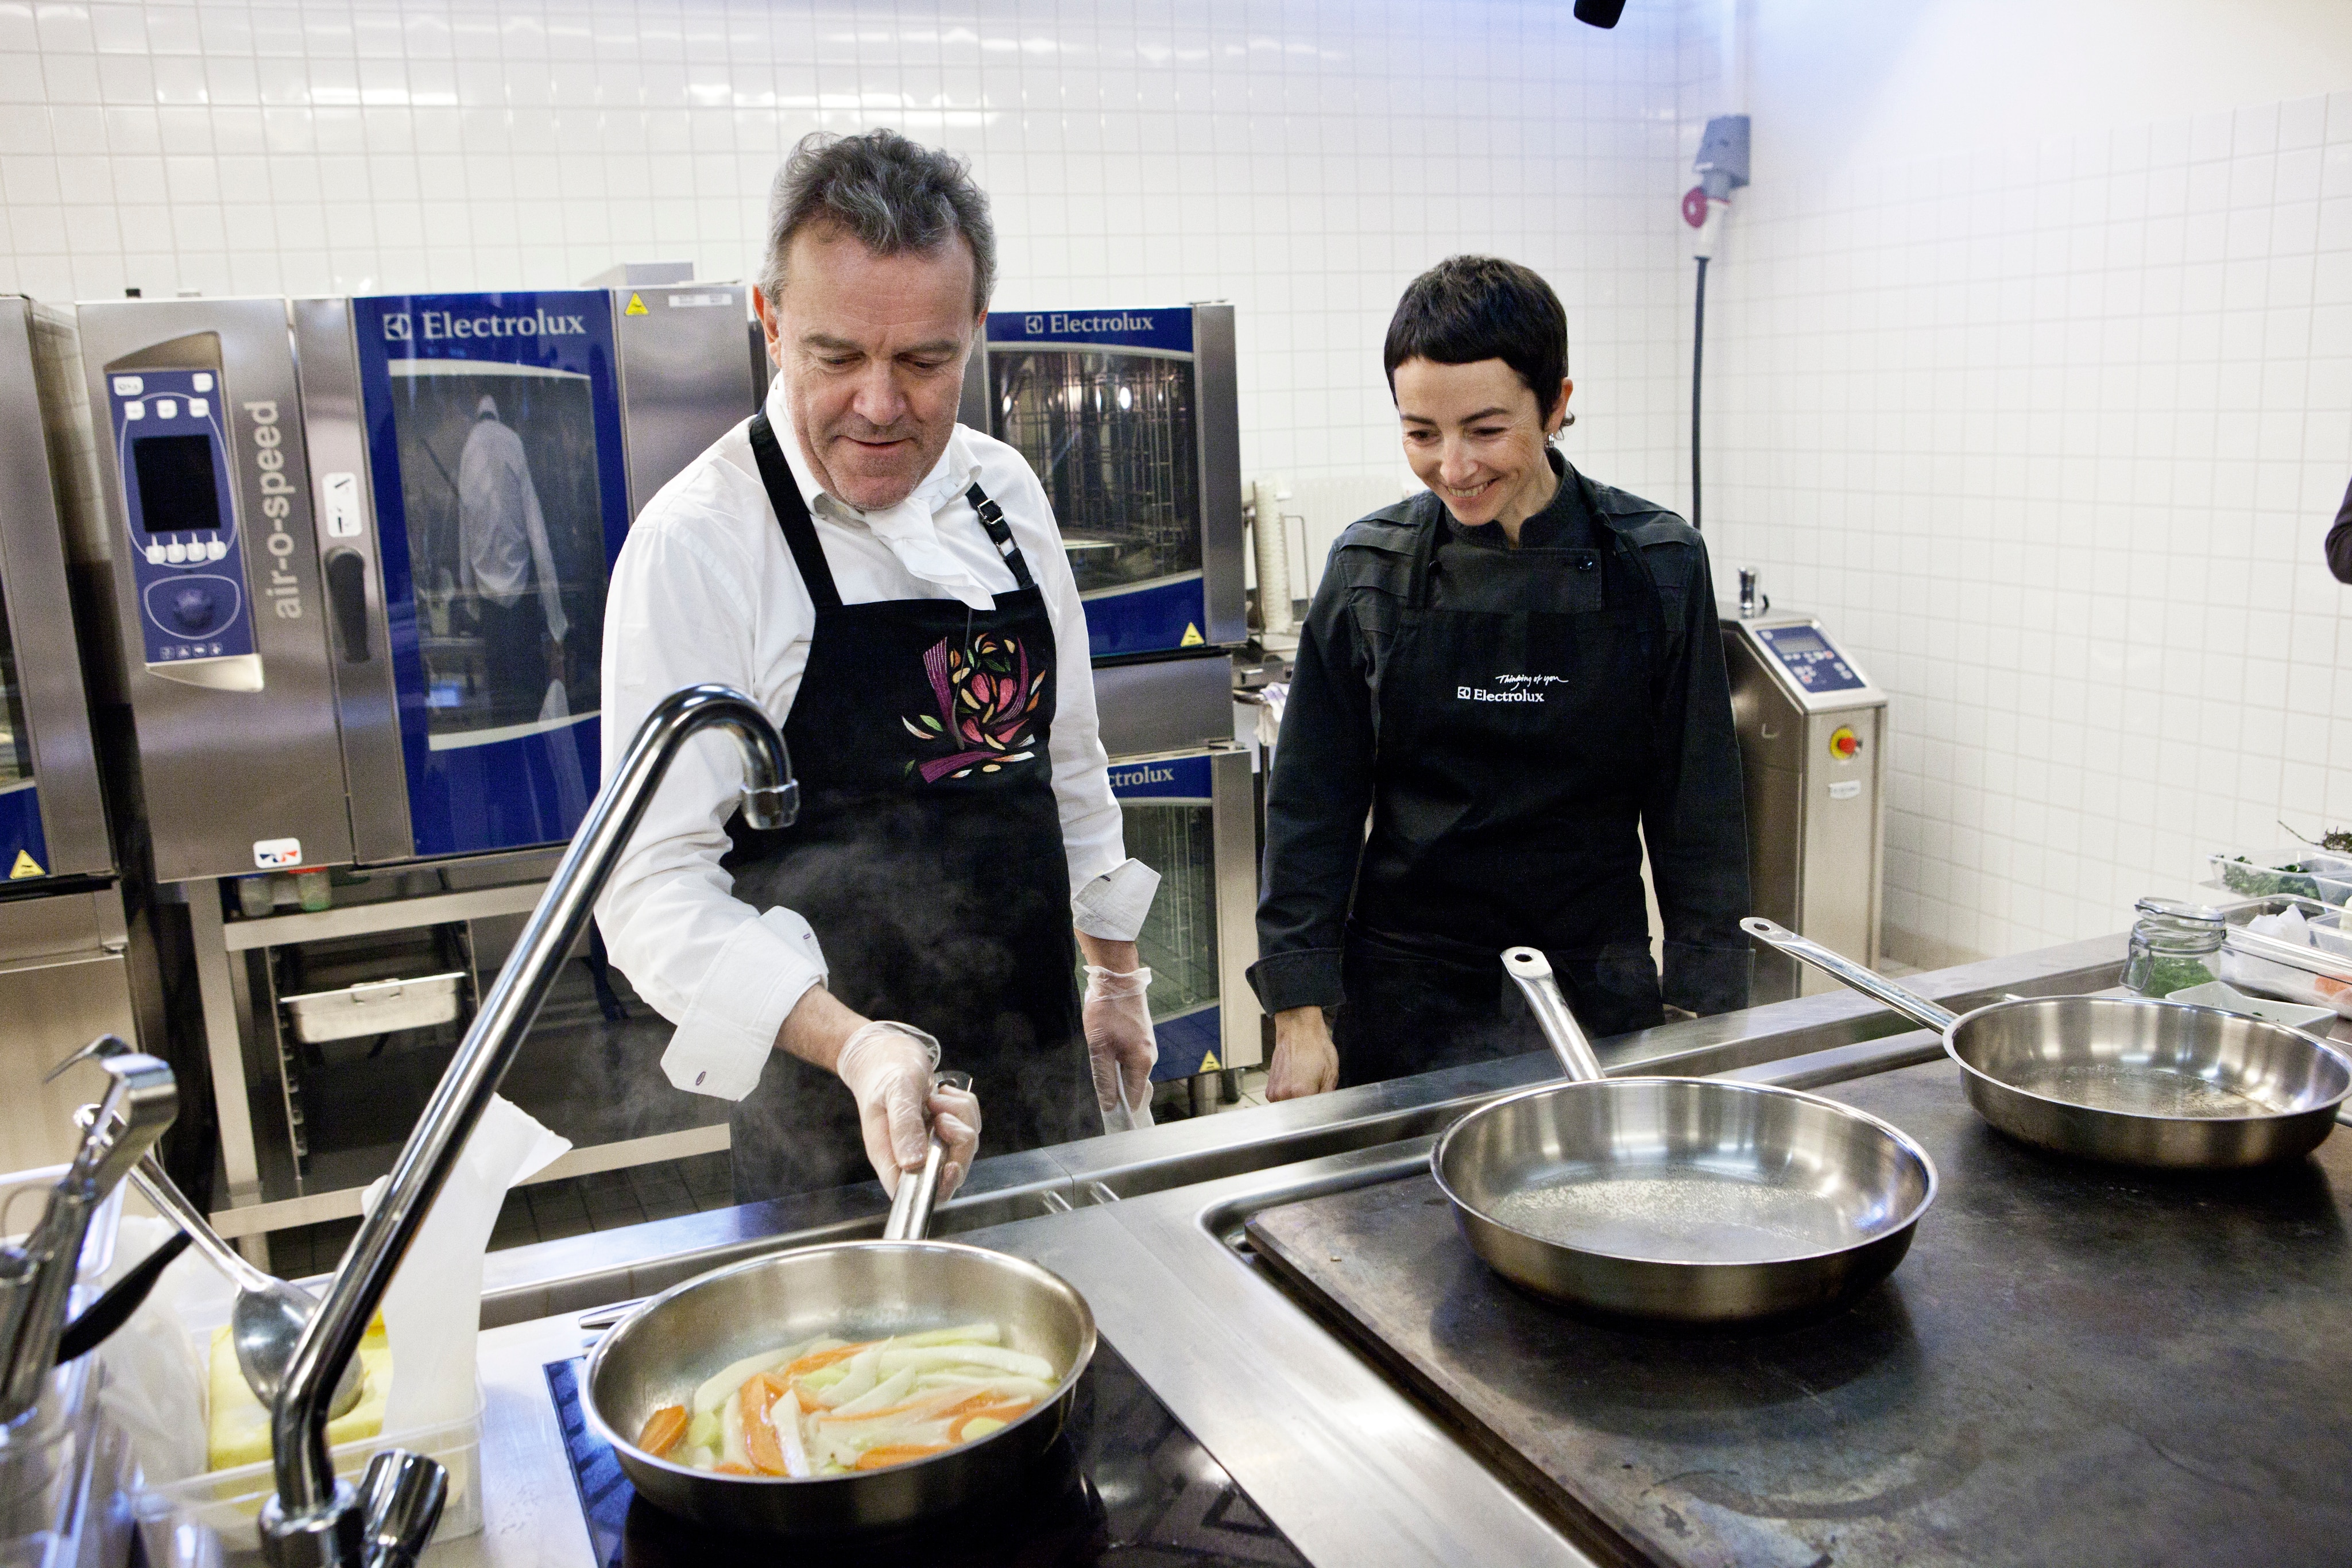  Electrolux  sets  footprint in gastronomy world with trend 